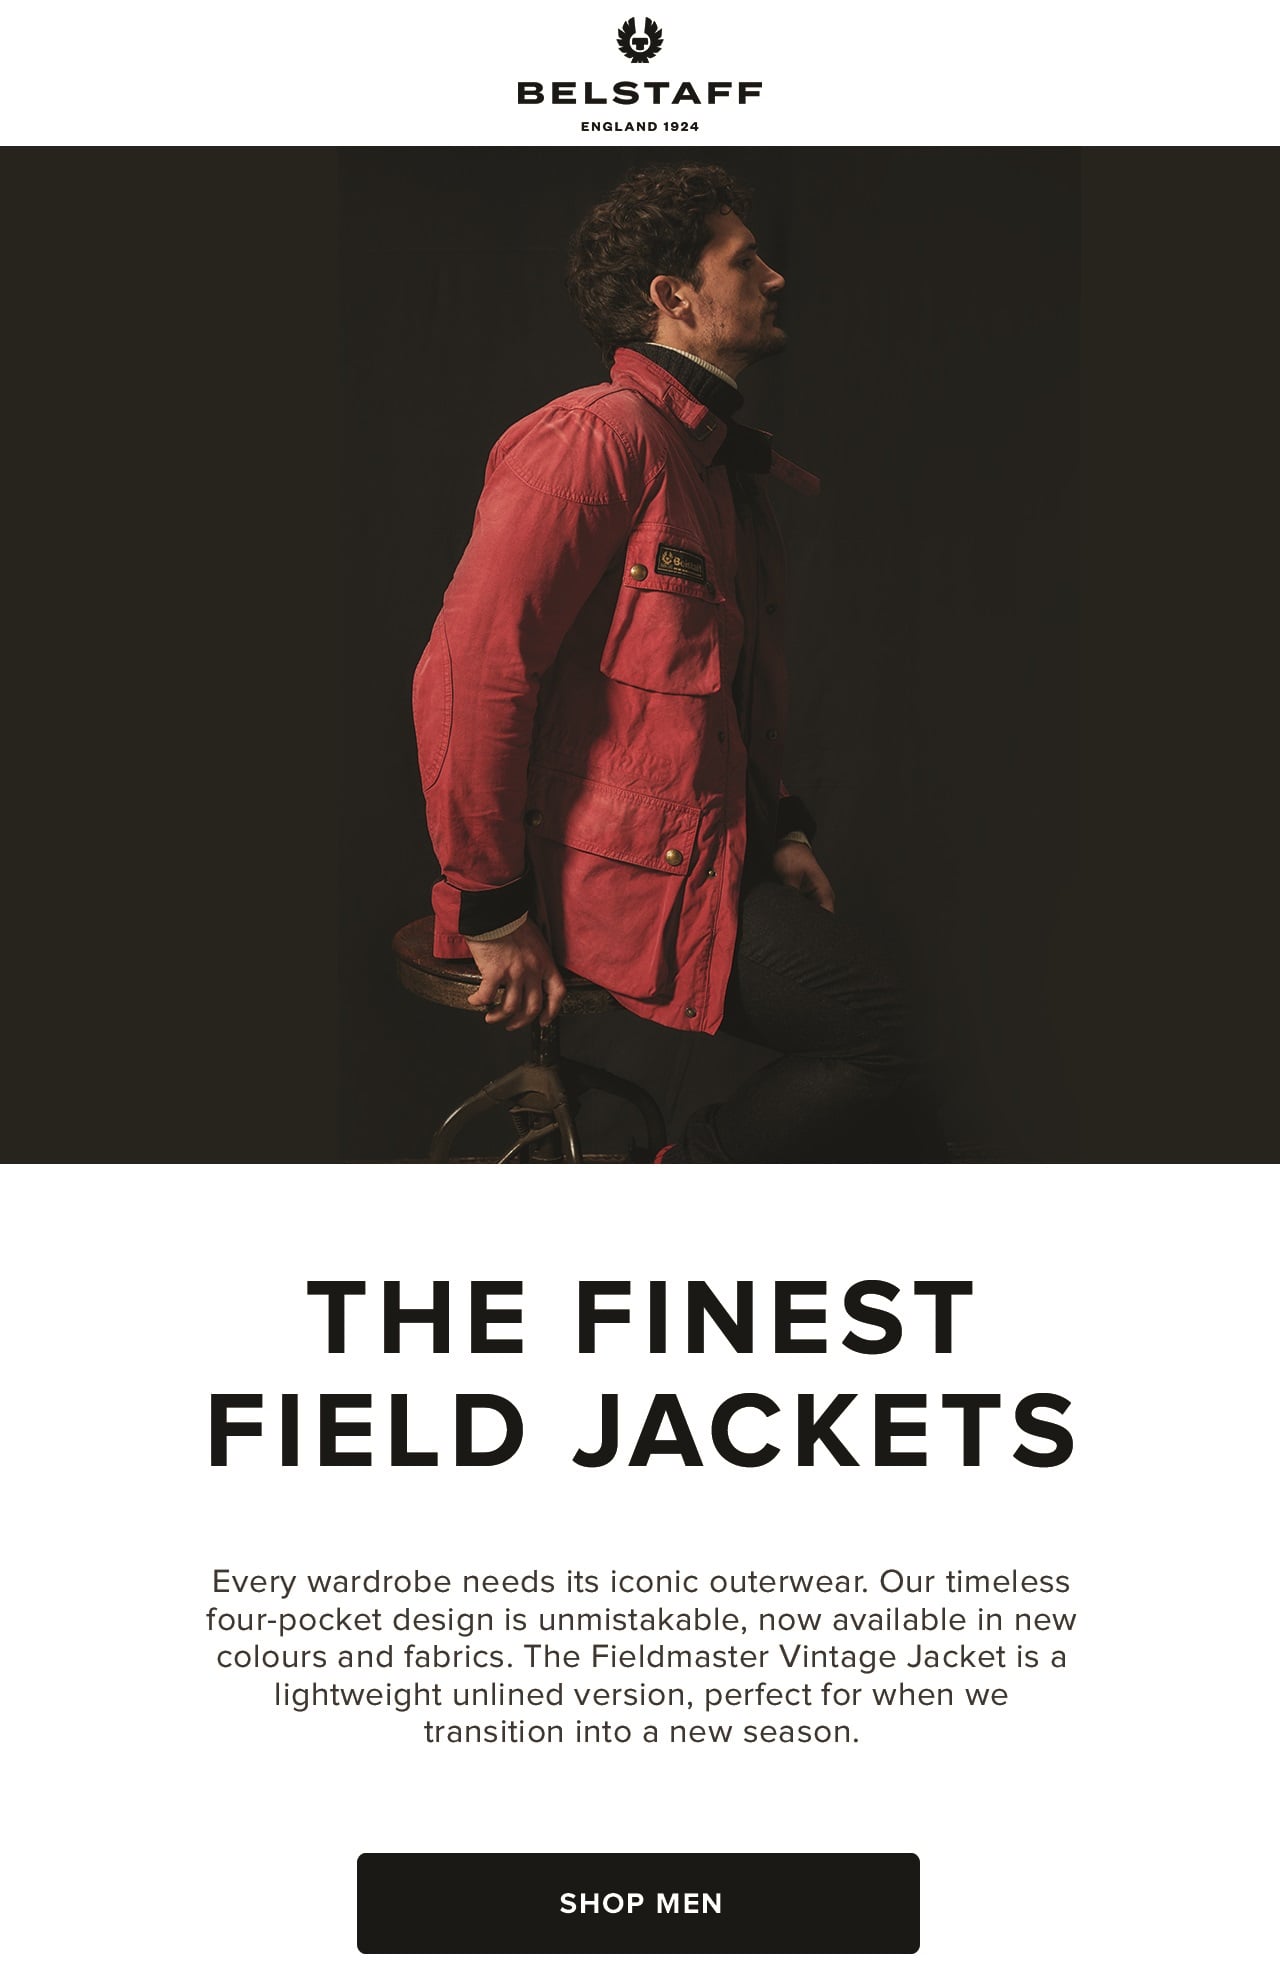 Every wardrobe needs its iconic outerwear. Our timeless four-pocket design is unmistakable, now available in new colours and fabrics. The Fieldmaster Vintage Jacket is a lightweight unlined version, perfect for when we transition into a new season. 